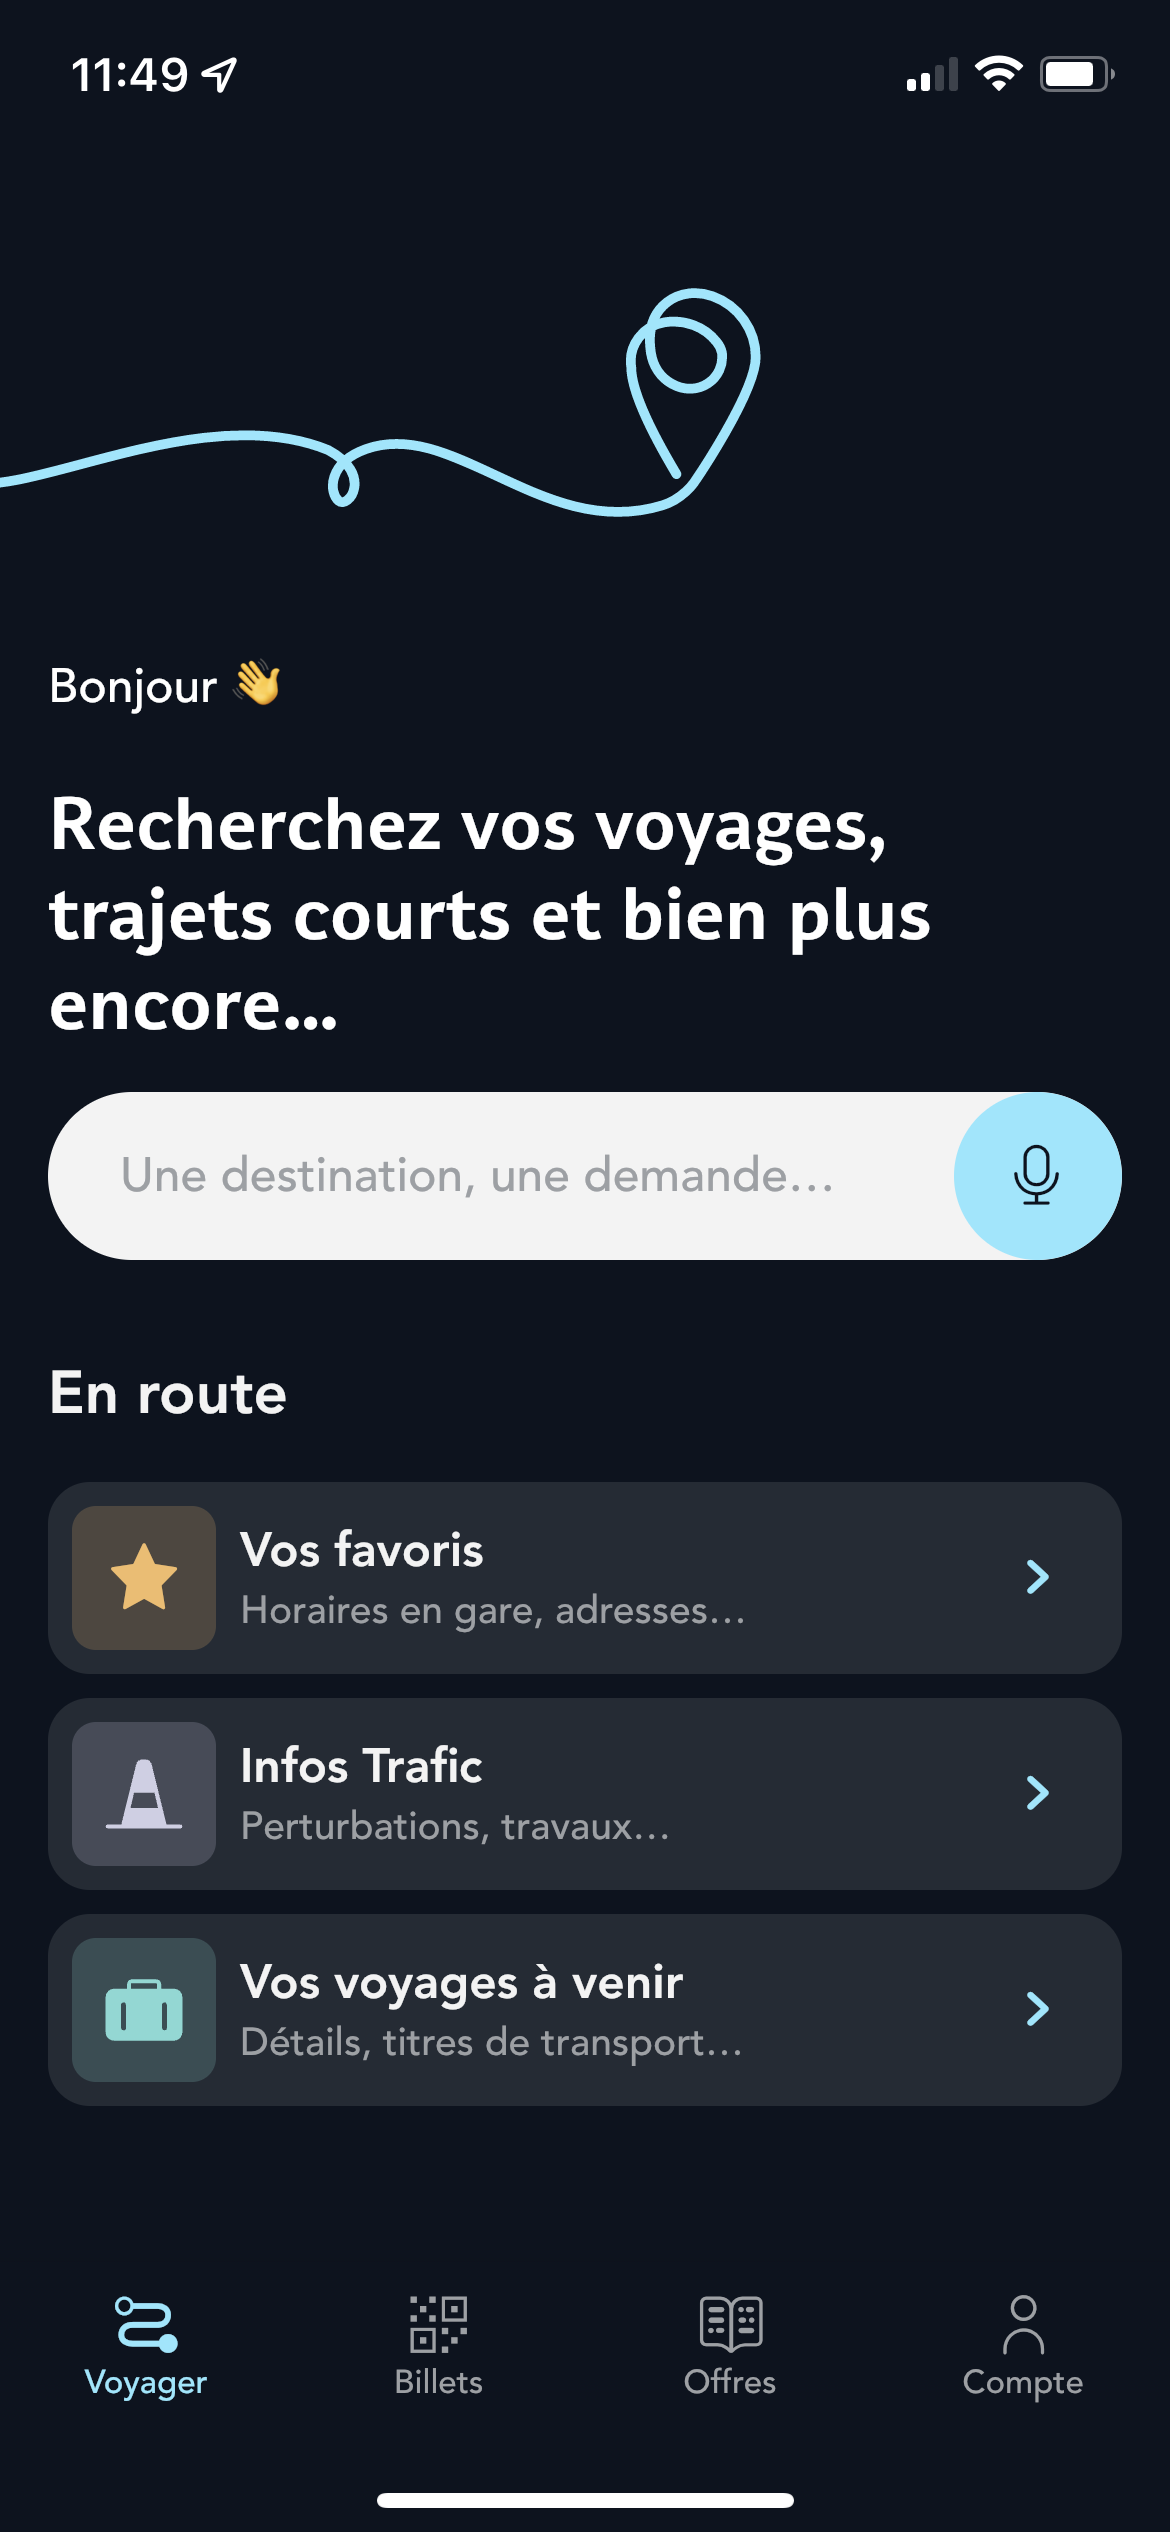 SNCF Connect © Clubic.com